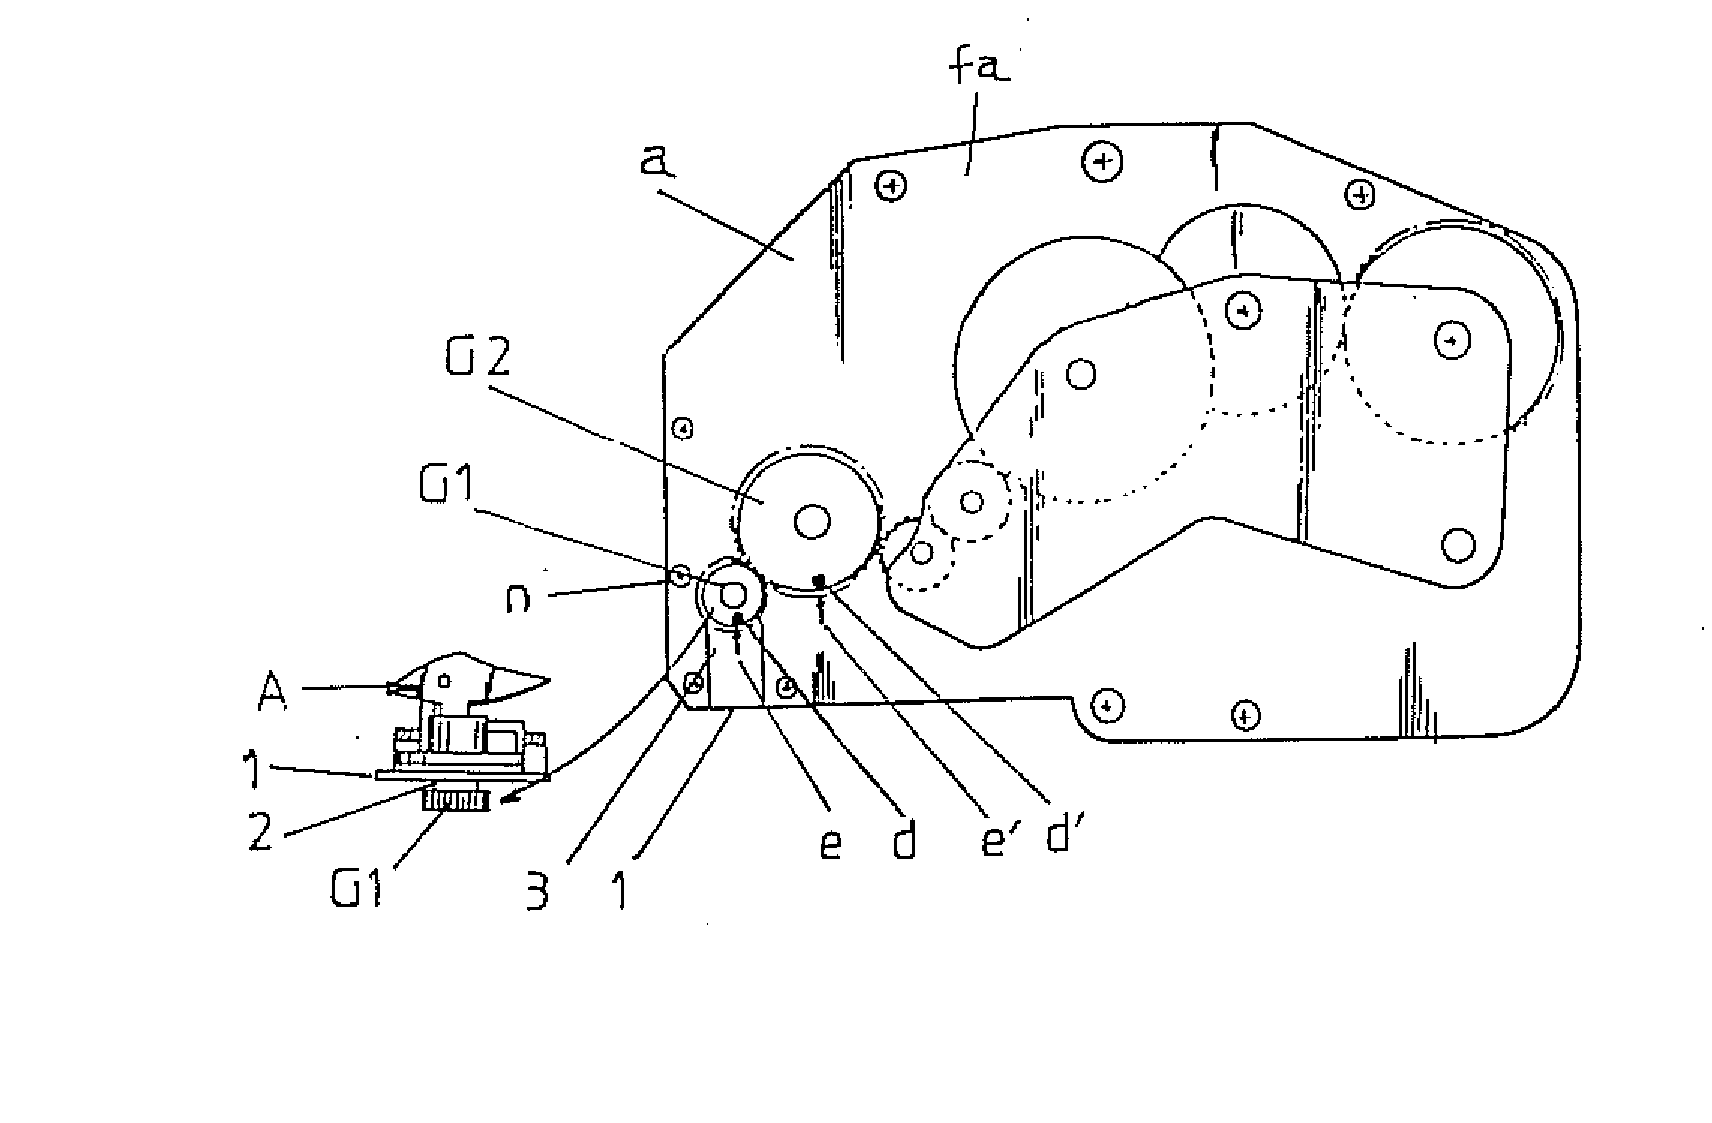 Apparatus for replacing a knotter in a tag fastener